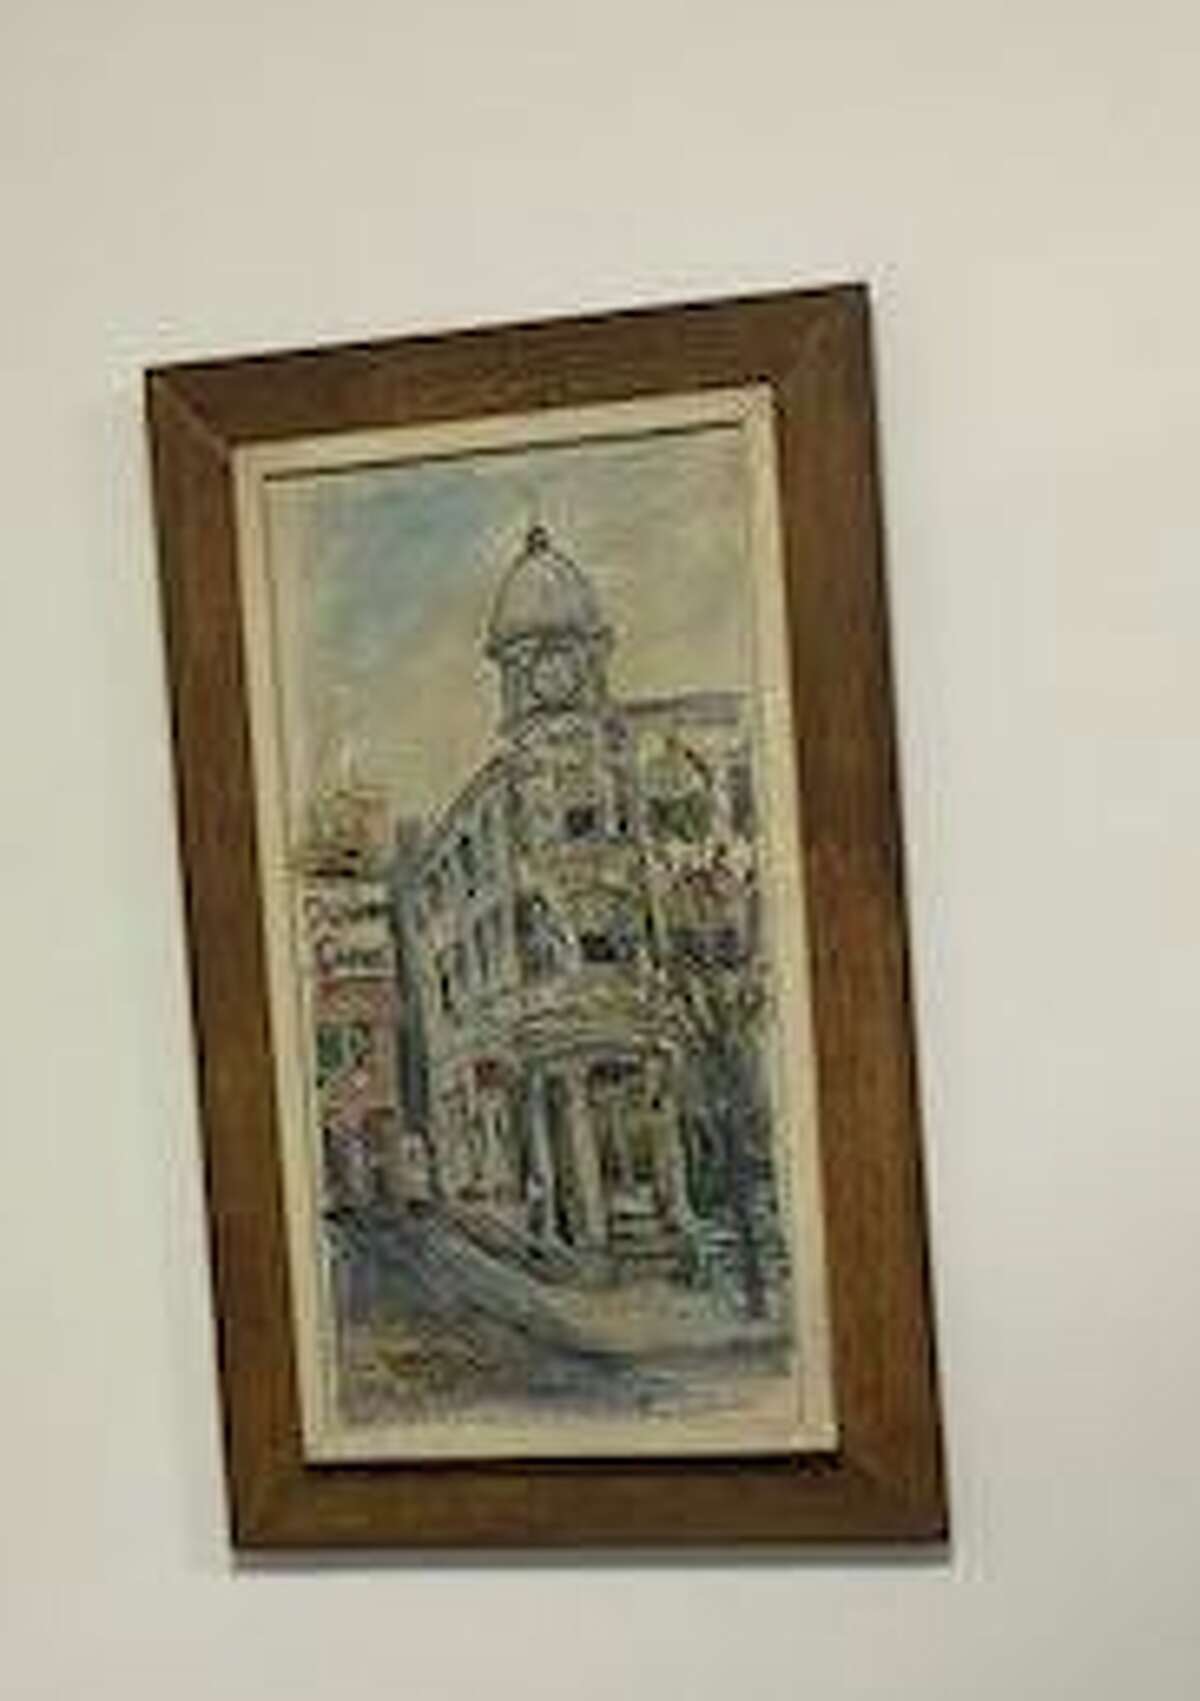 This painting in Editorial Page Editor Jacqueline Smith’s office depicts the home of The News-Times on Danbury’s Main Street before the newspaper operations expanded to a brick building at 333 Main St. Two years ago, offices moved to 345 Main St.